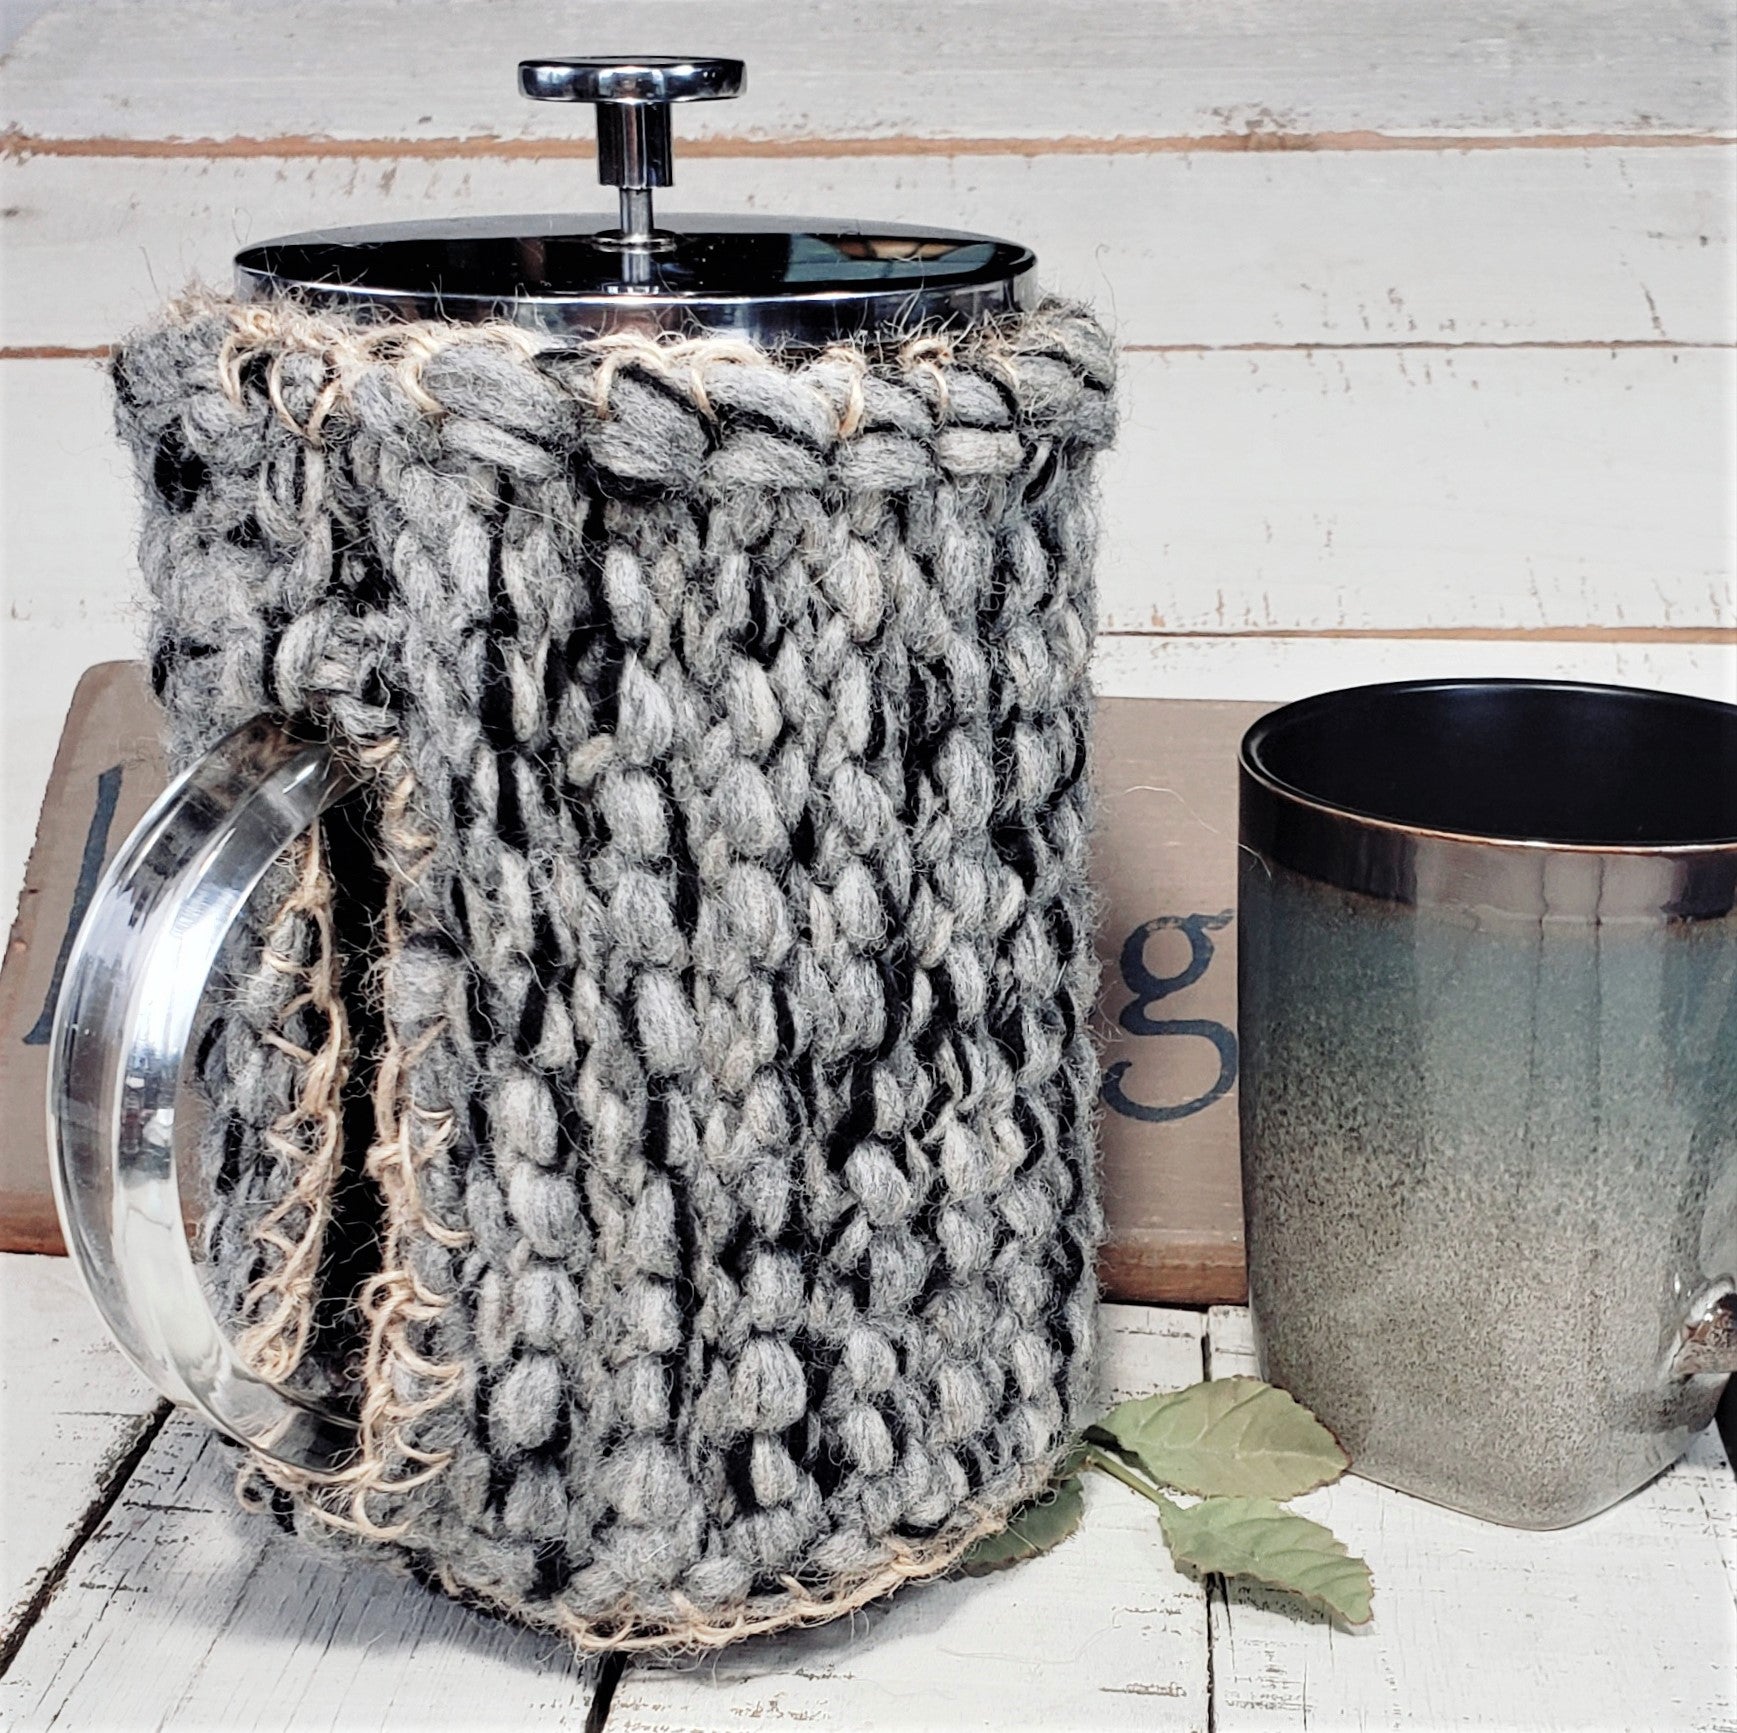 French Press Cozy, Cafetiere, Bean Blanket Belt Cover- Granite Grey Reversible